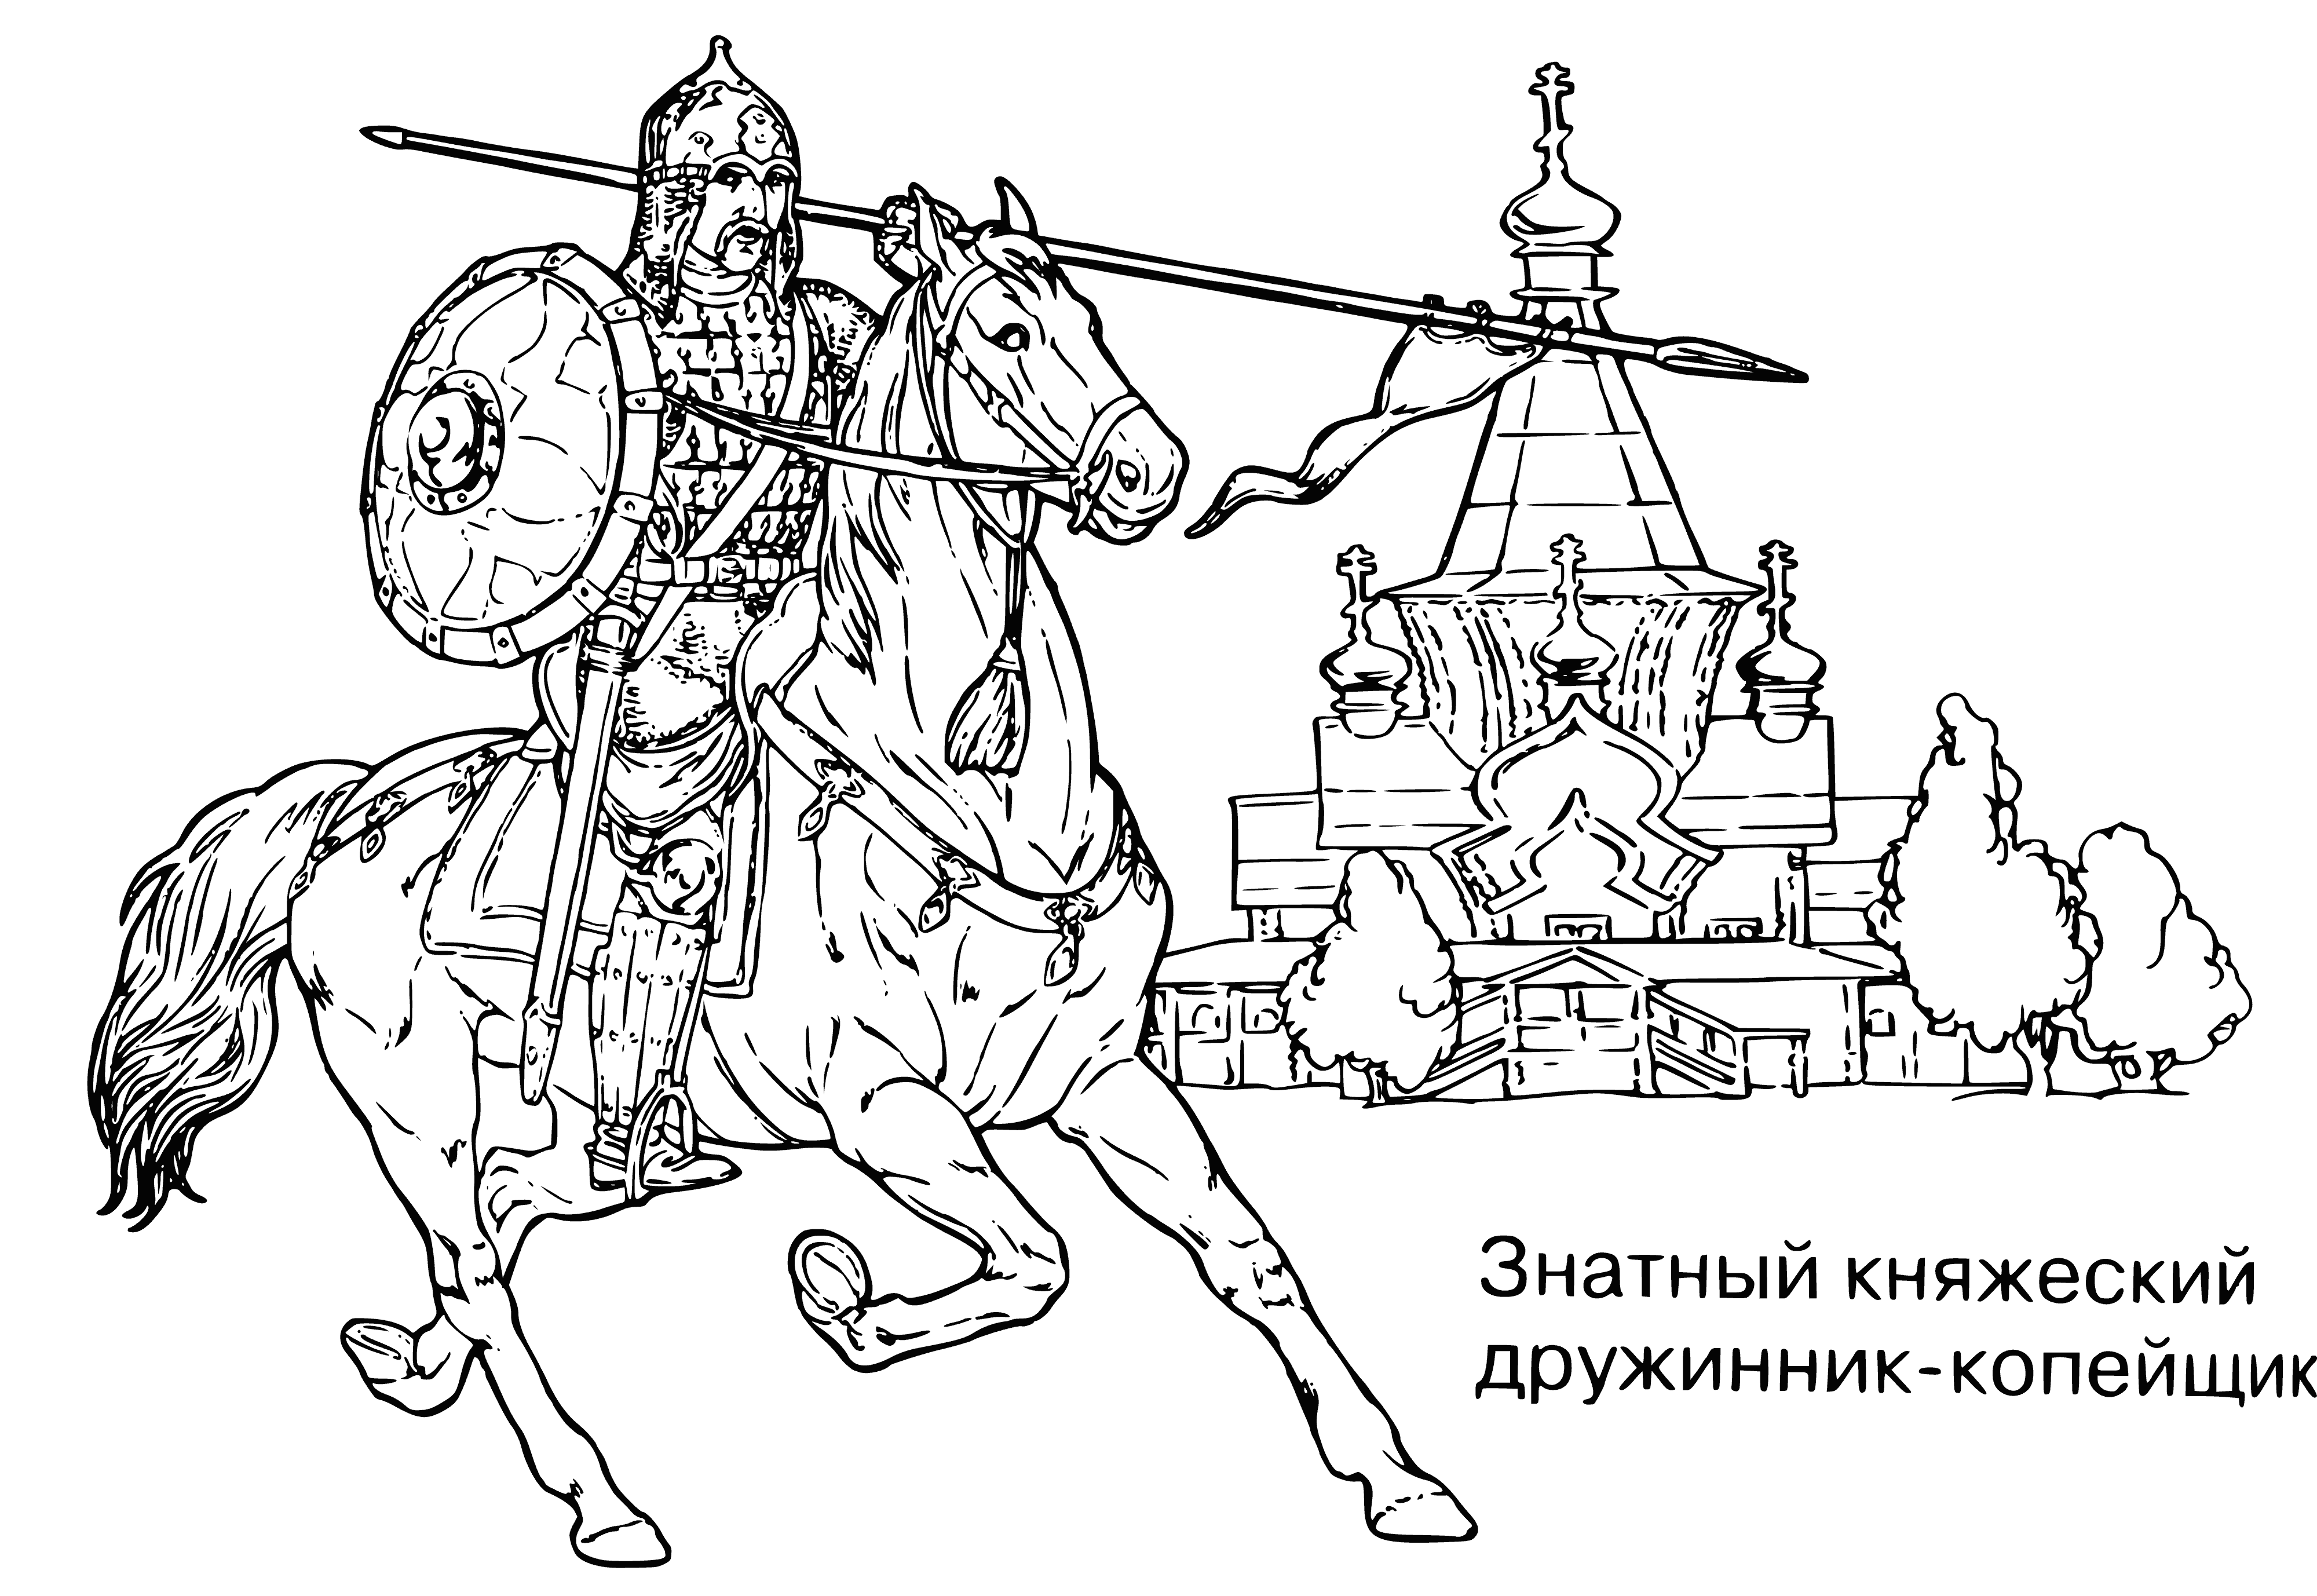 A spearman coloring page